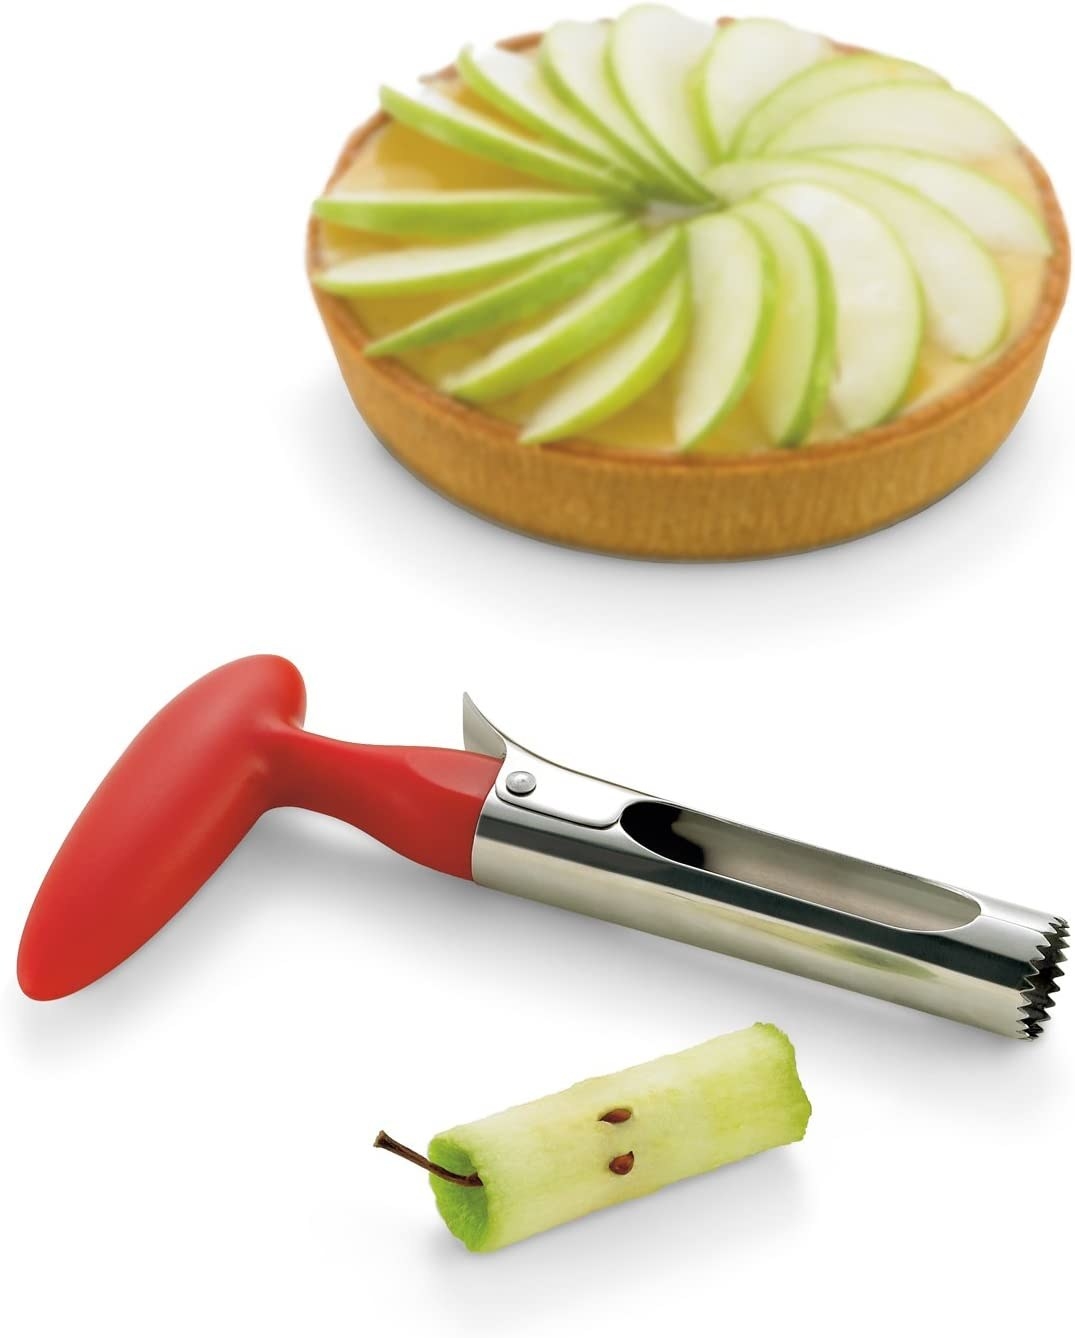 The apple corer beside sliced apples and an apple core